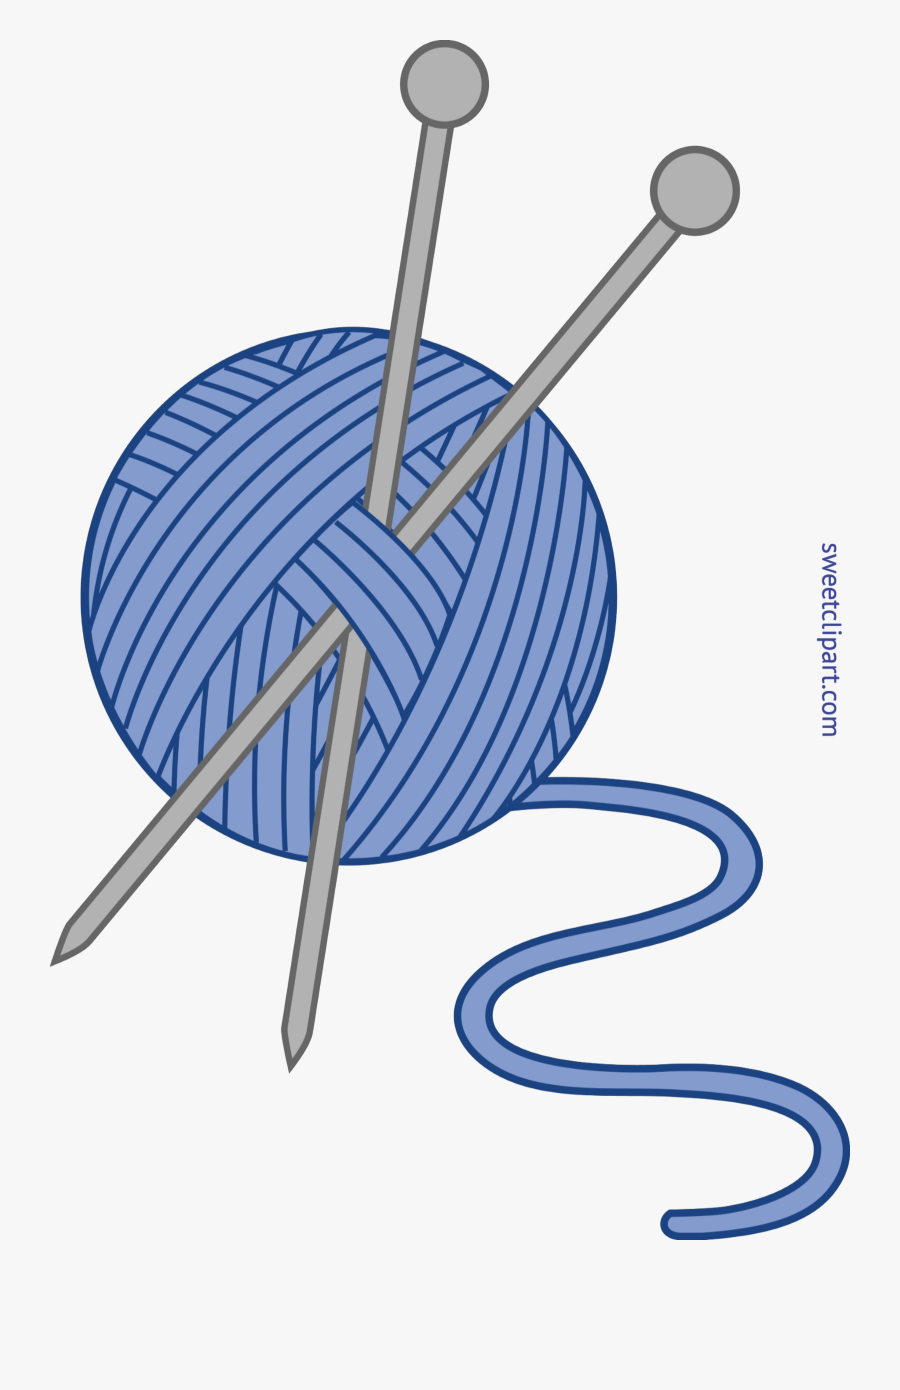 Knitting Clipart At Getdrawings - Knitting Clip Art, Transparent Clipart